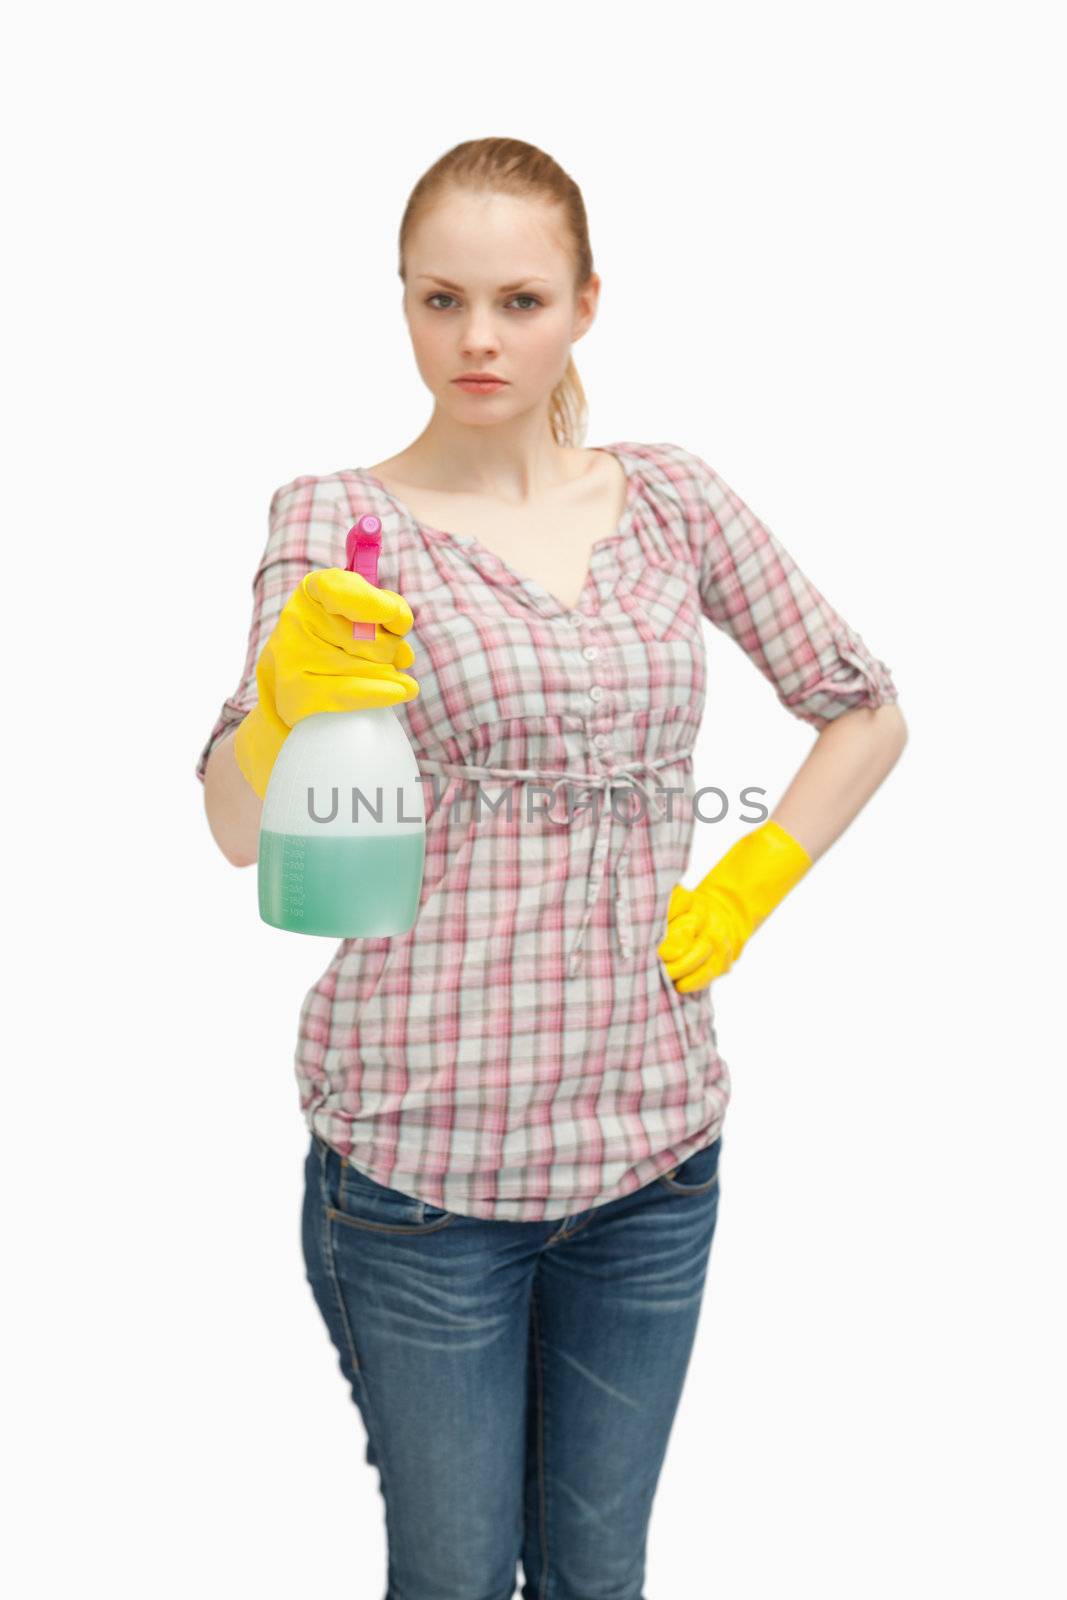 Serious woman holding a spray bottle while standing against white background